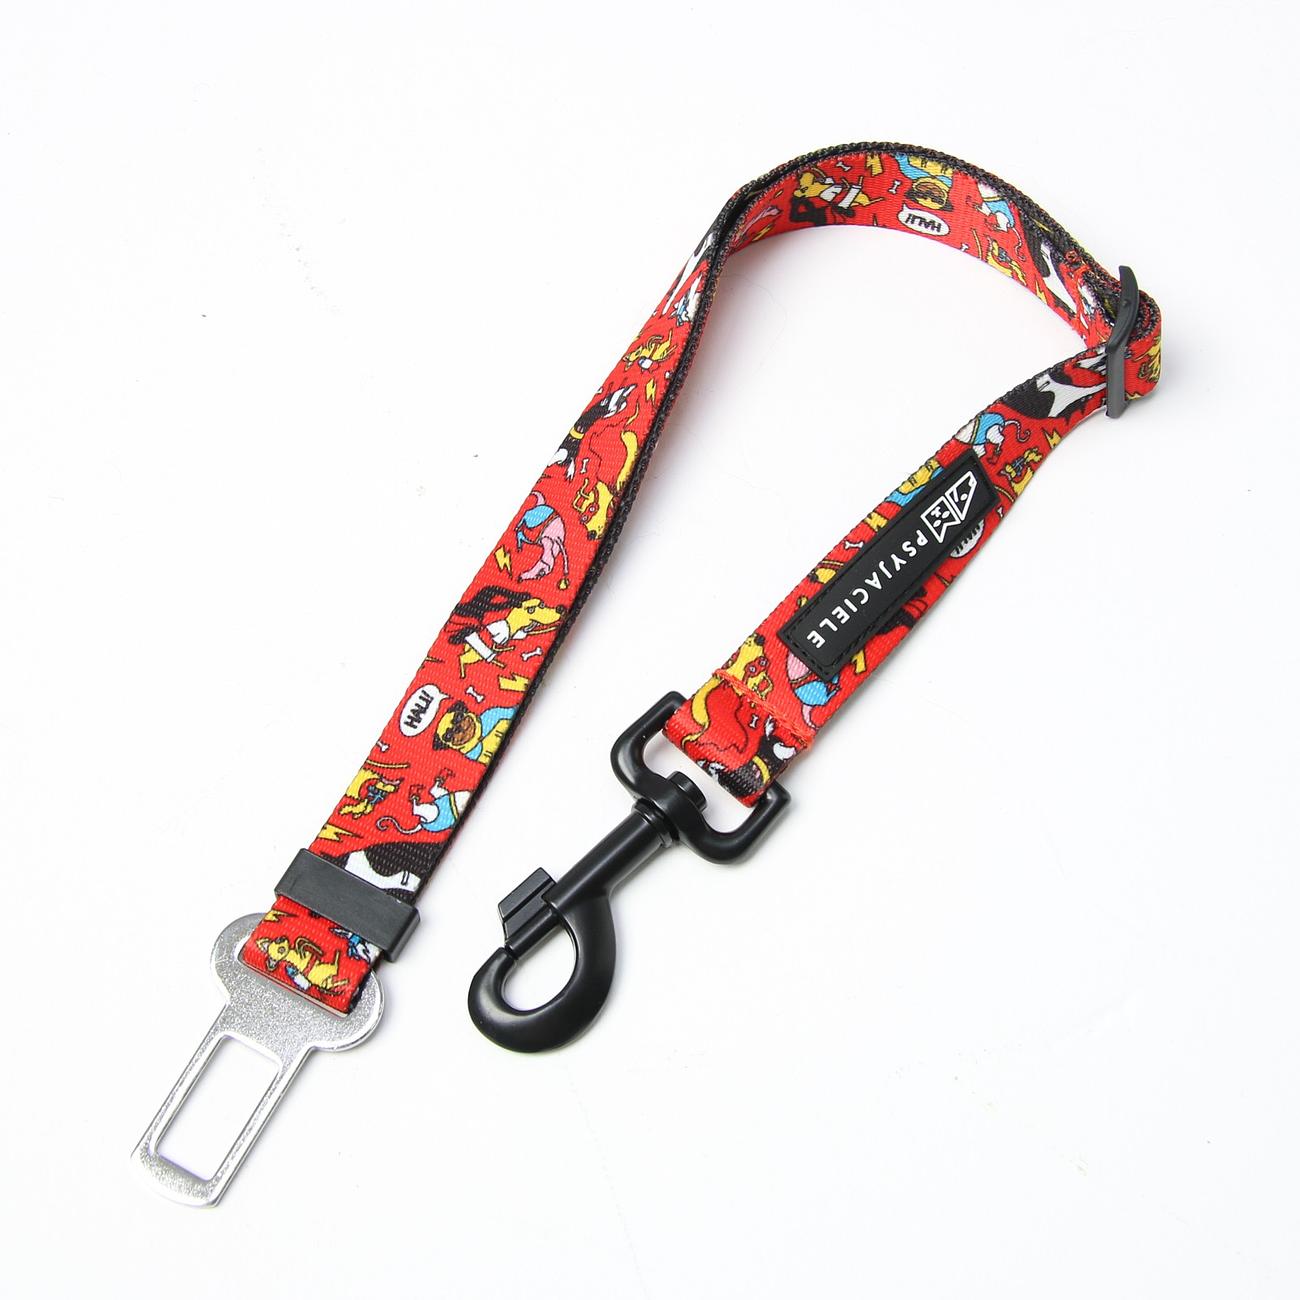 "Woof for the better world" car belts